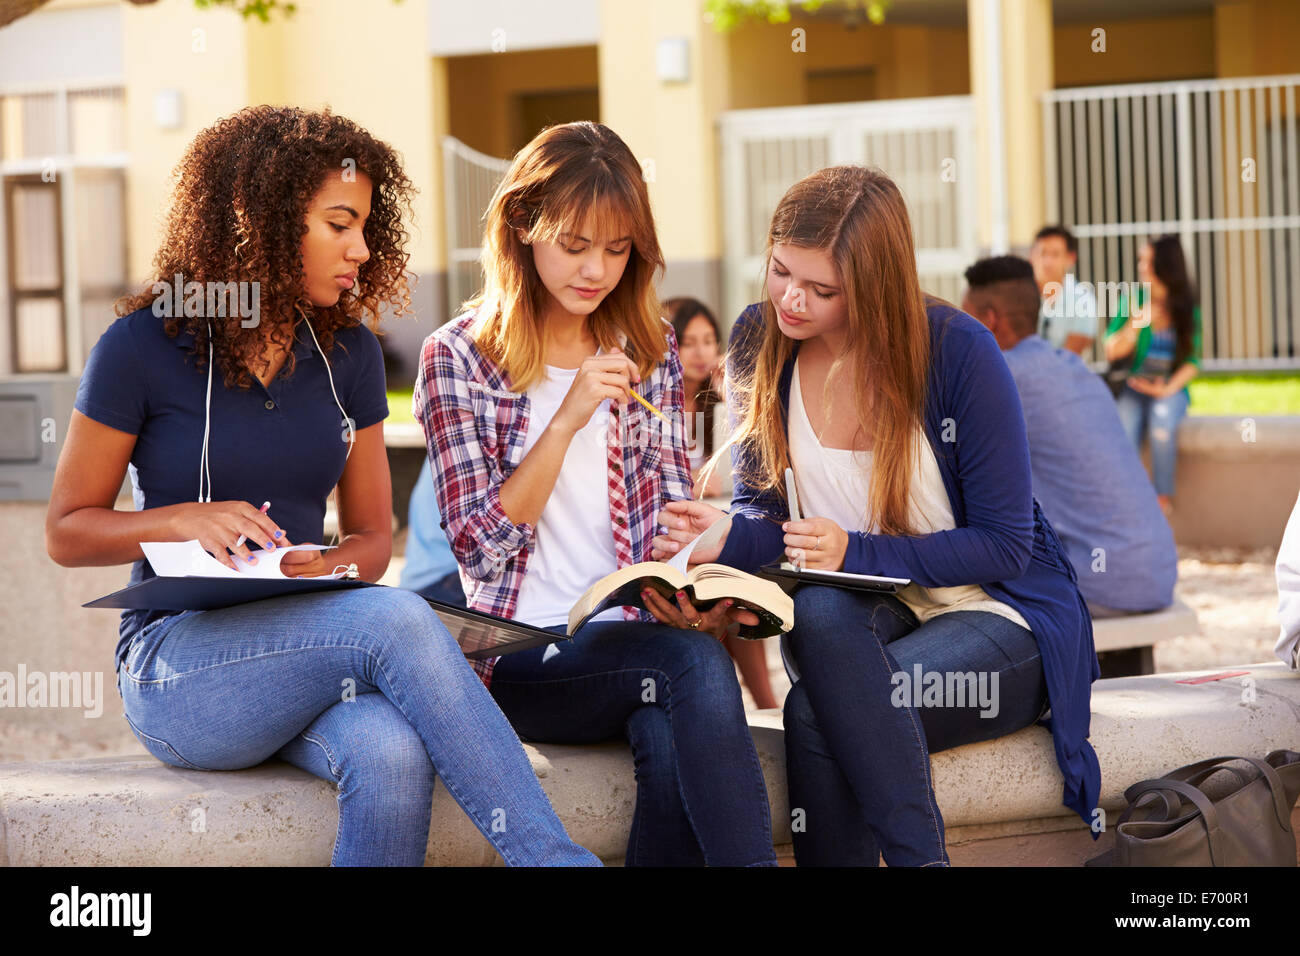 Three Female High School Students Working On Campus Stock Photo